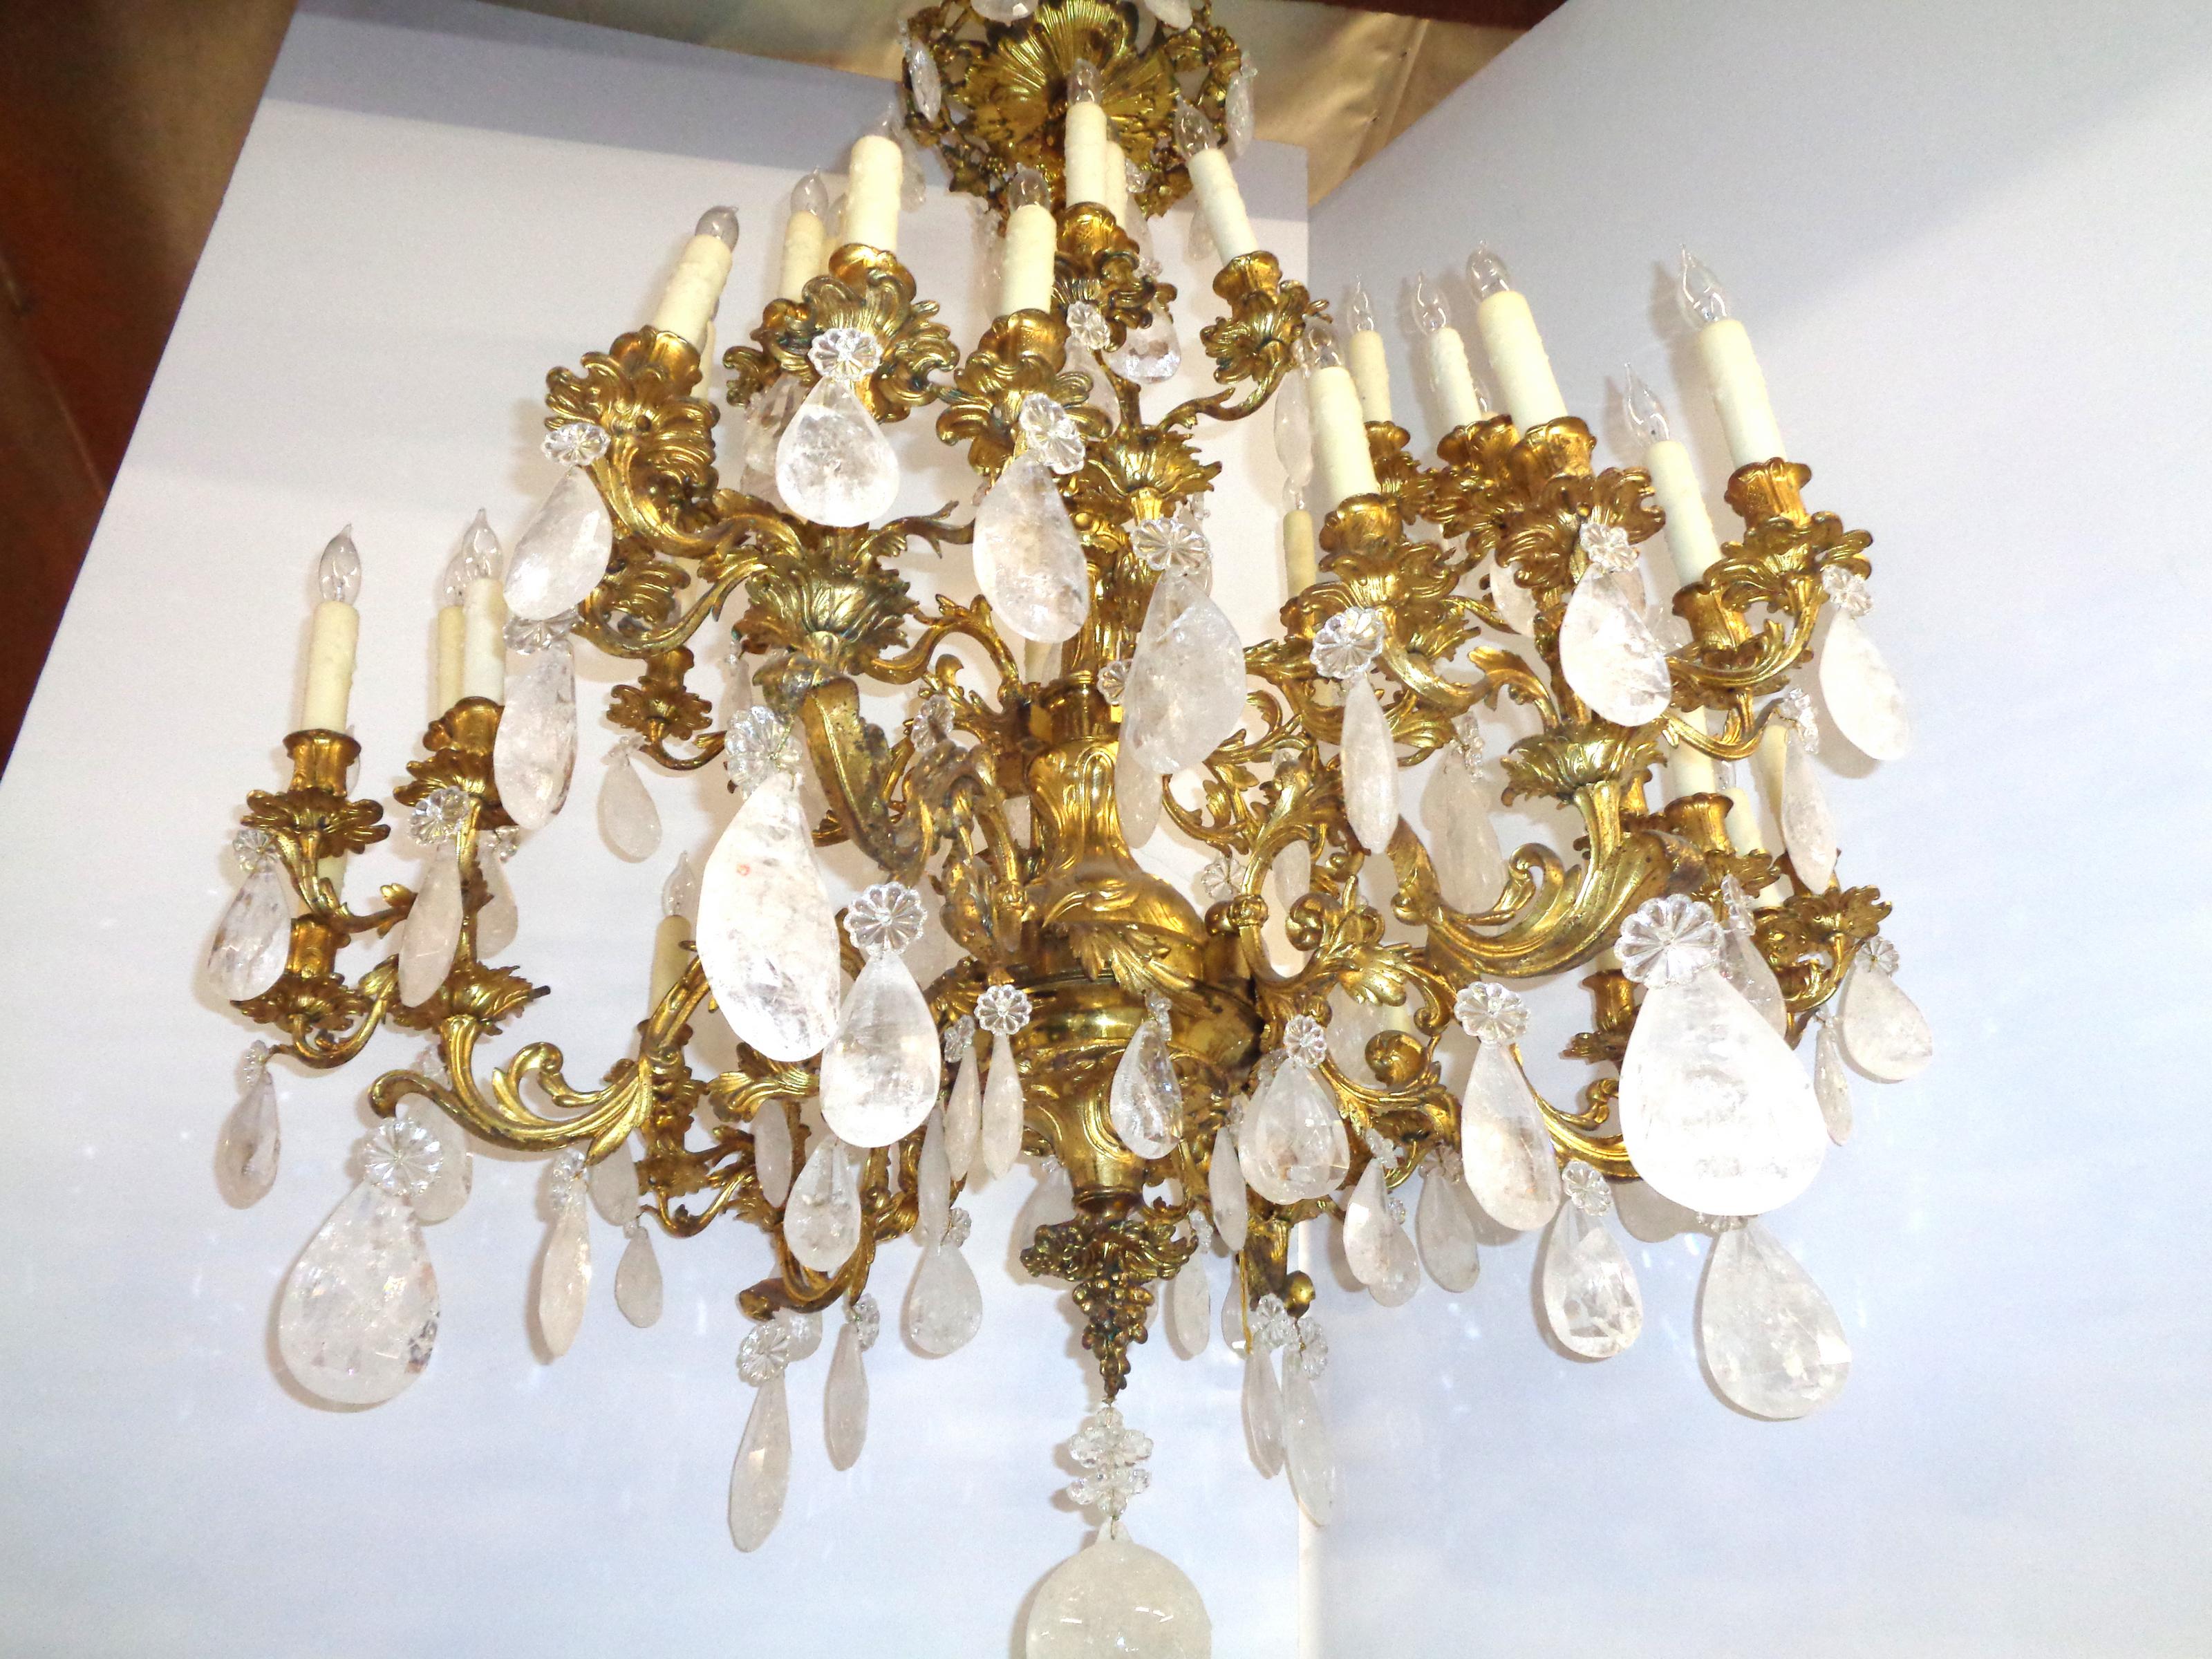 French Bronze Dore Louis XV Style Baccarat and Rock Crystal Chandelier In Excellent Condition For Sale In West Hollywood, CA